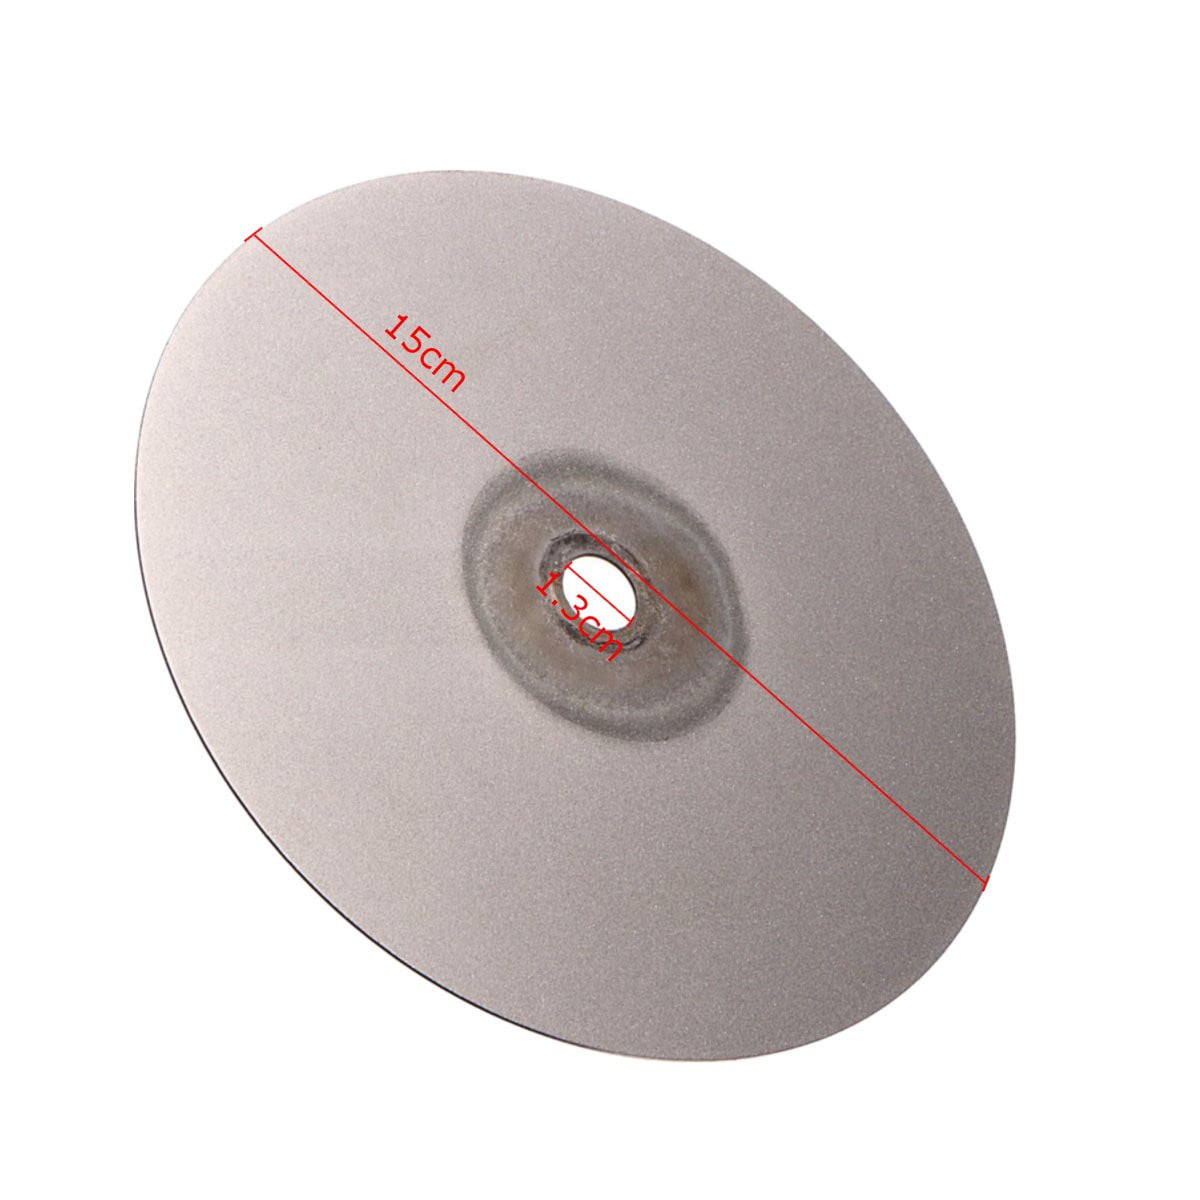 Pceewtyt 4Pcs 6 Inch 600/800/1200/3000 Grit Flat Lap Wheel Lapping Grinding Disc for Grinding Pad Tool Power Tool Accessories